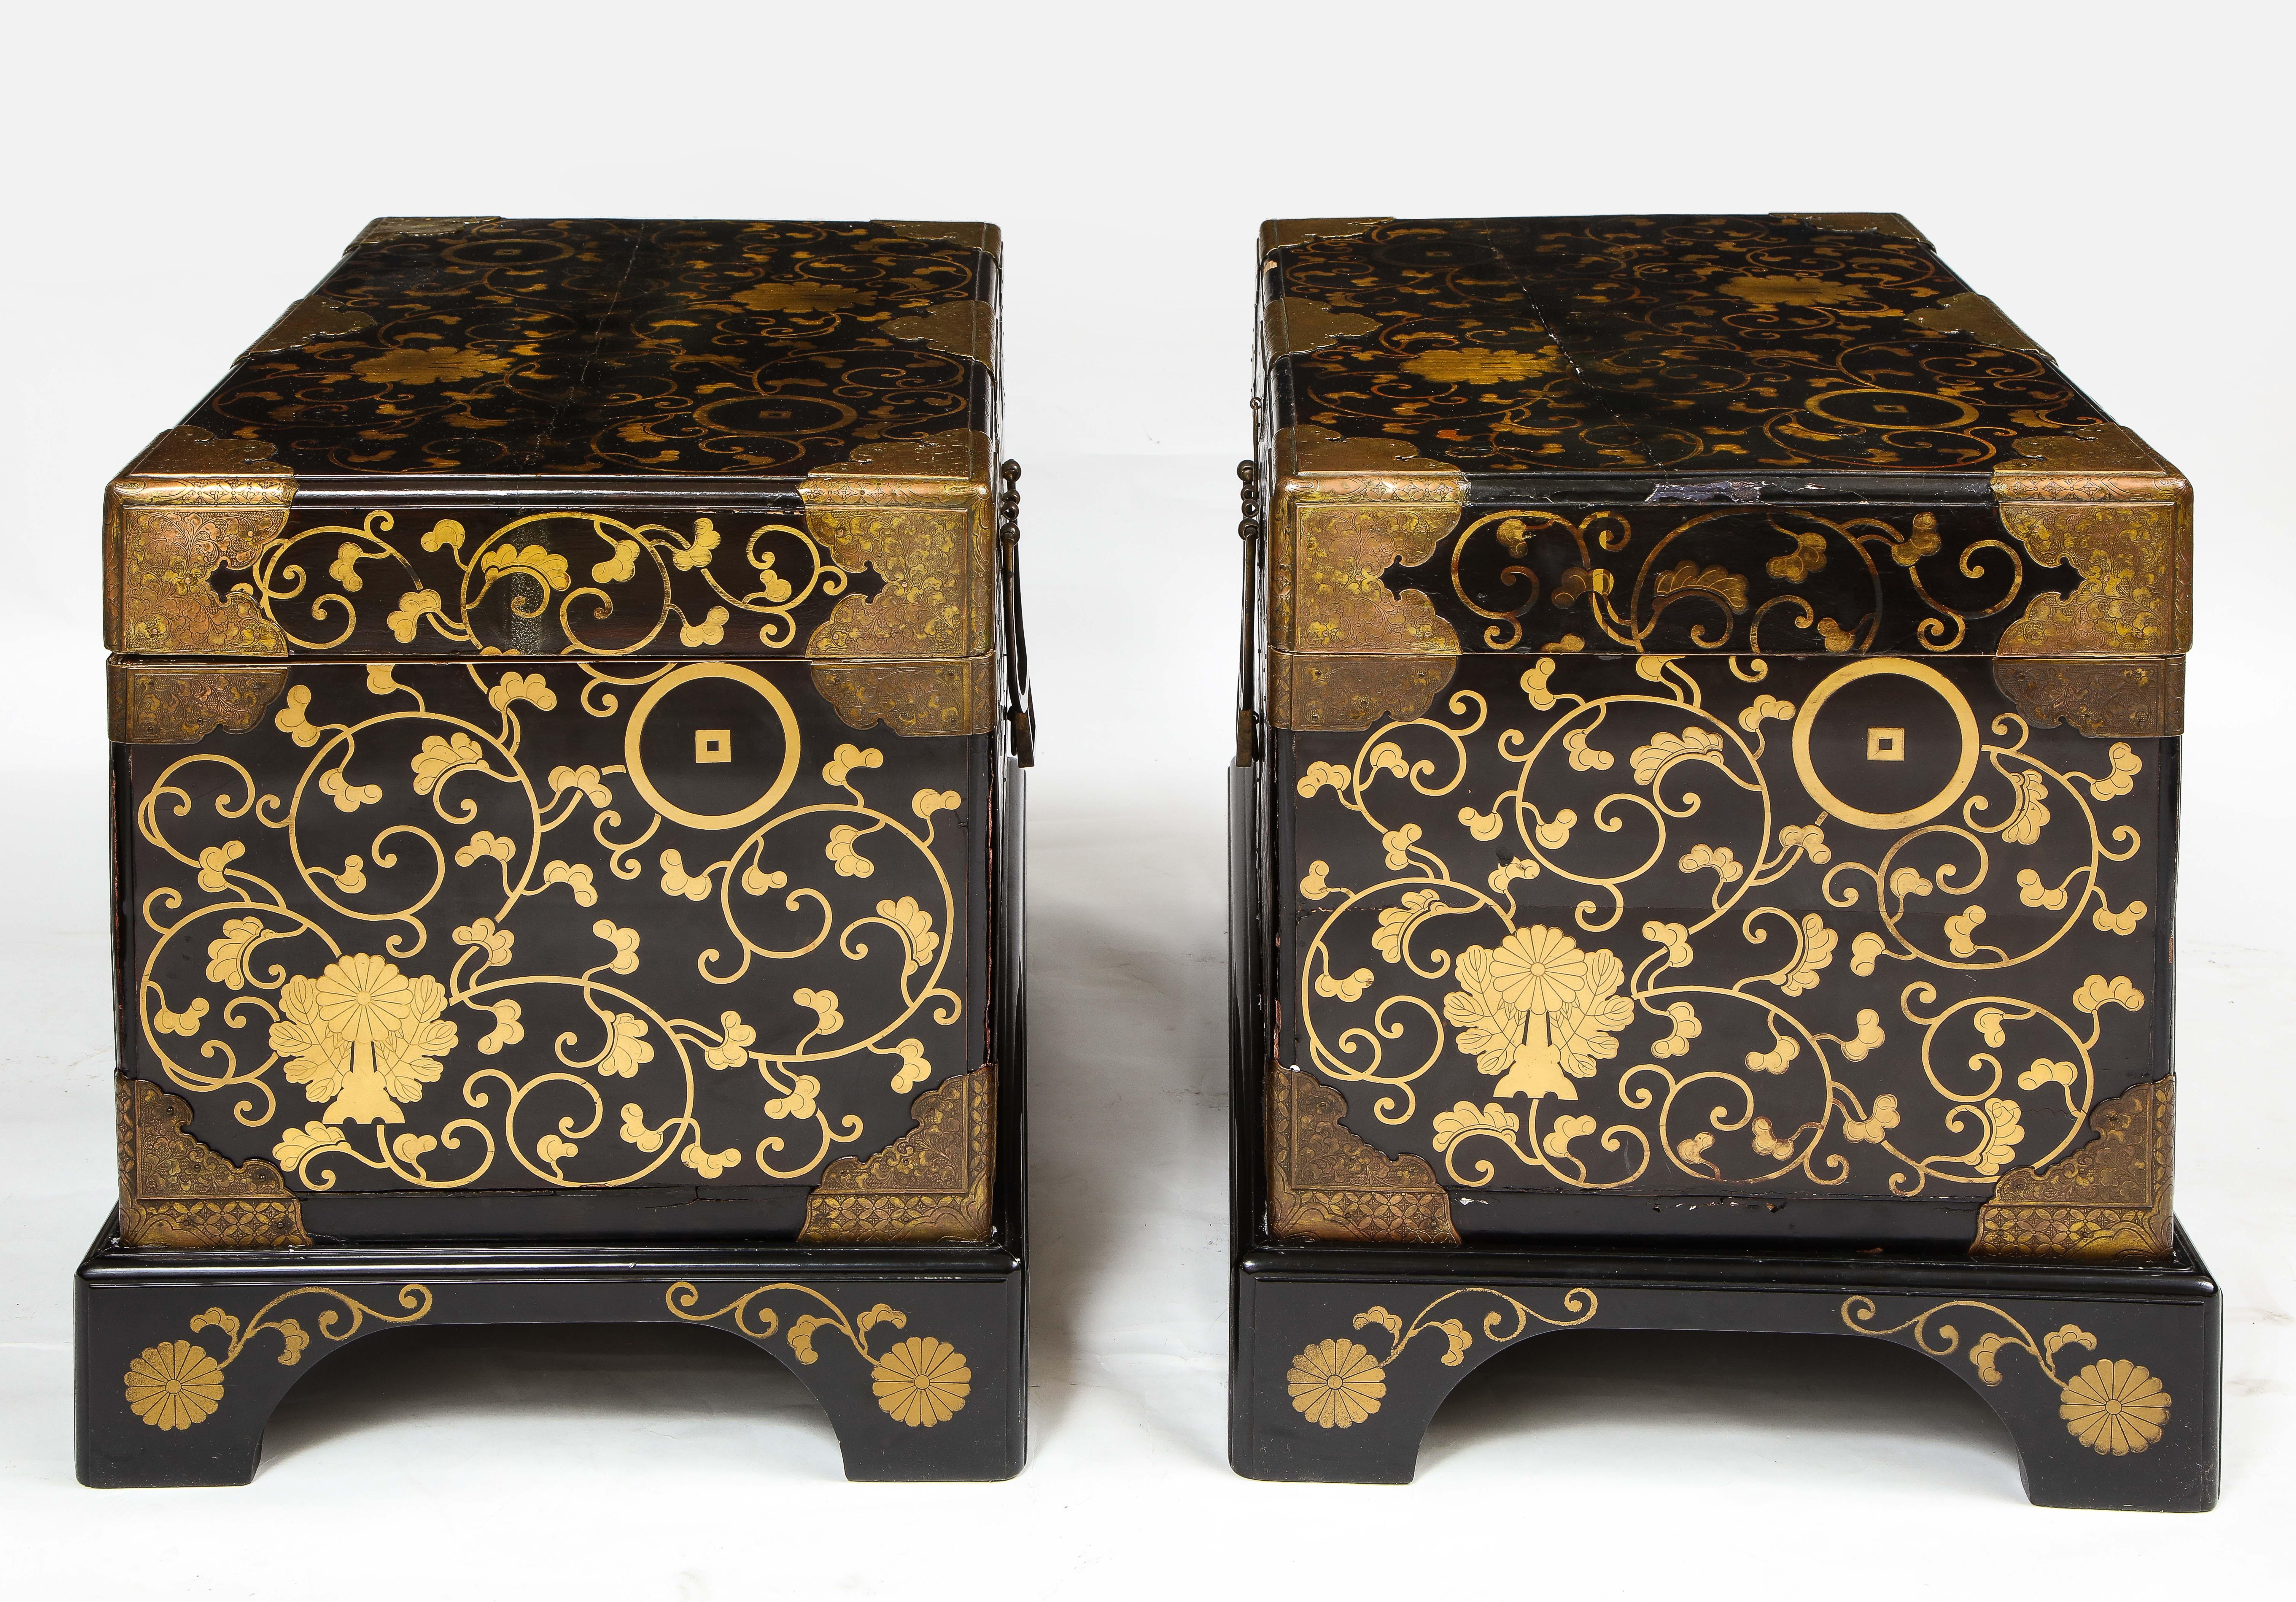  Pair of 19th Century Japanese Meiji Period Dore Bronze Mounted Lacquered Chests For Sale 3